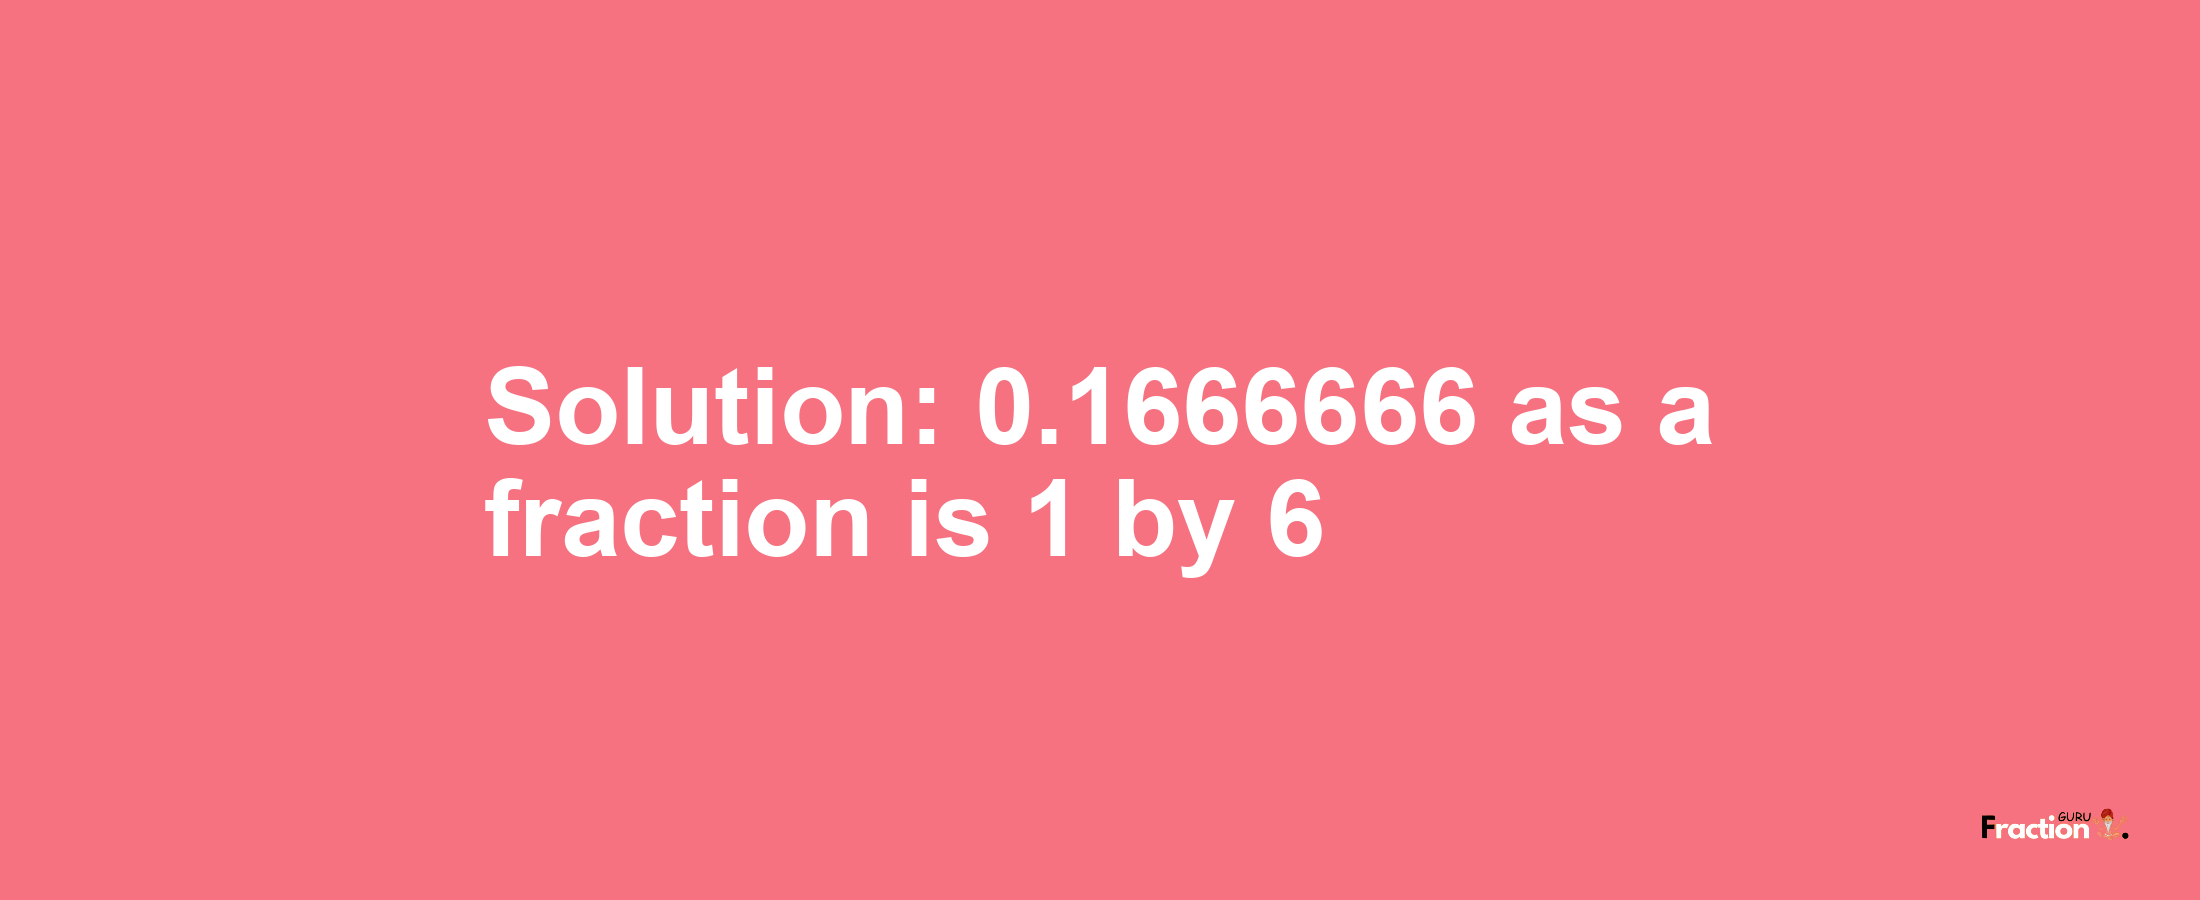 Solution:0.1666666 as a fraction is 1/6